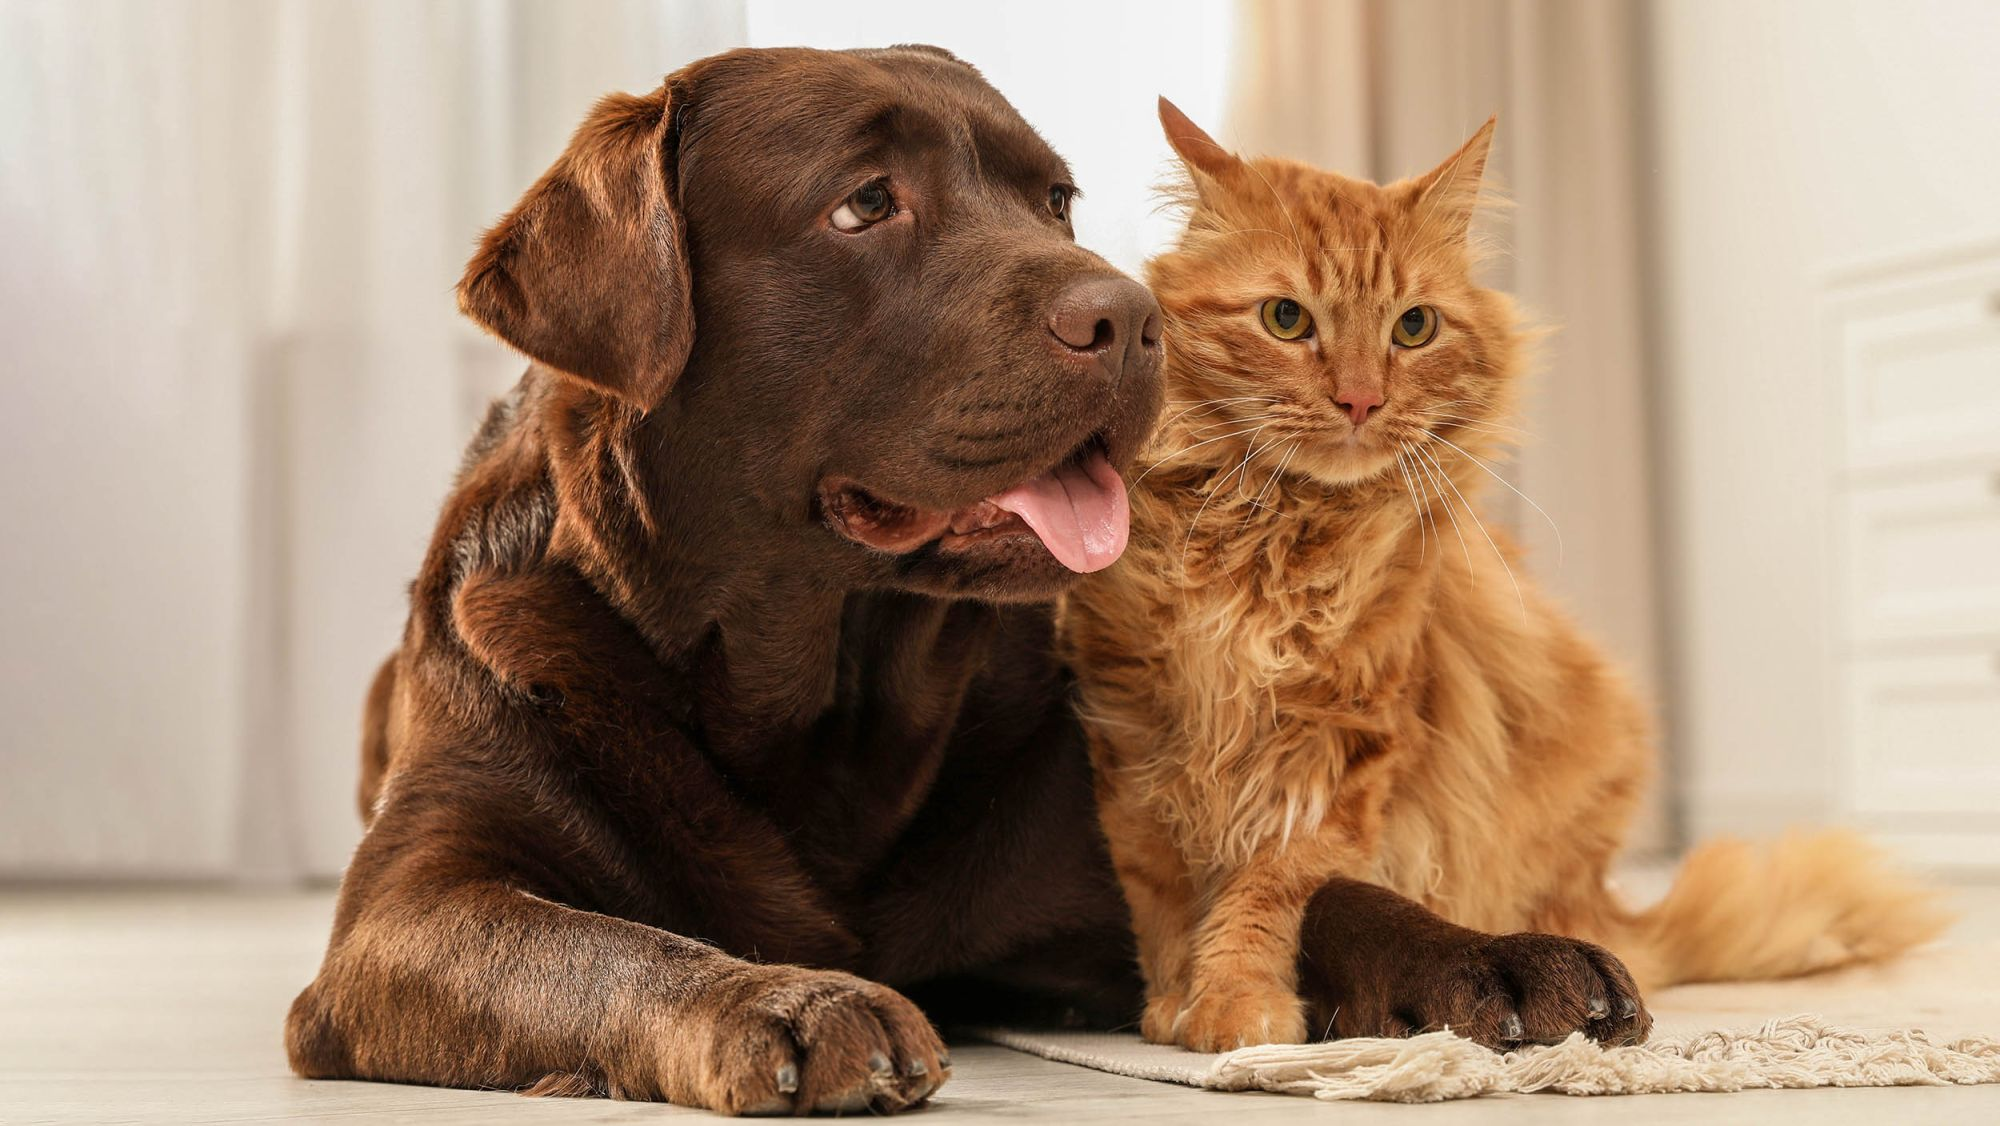 Adult Brown Labrador Retriever and ginger cat lying down on a white rug indoors